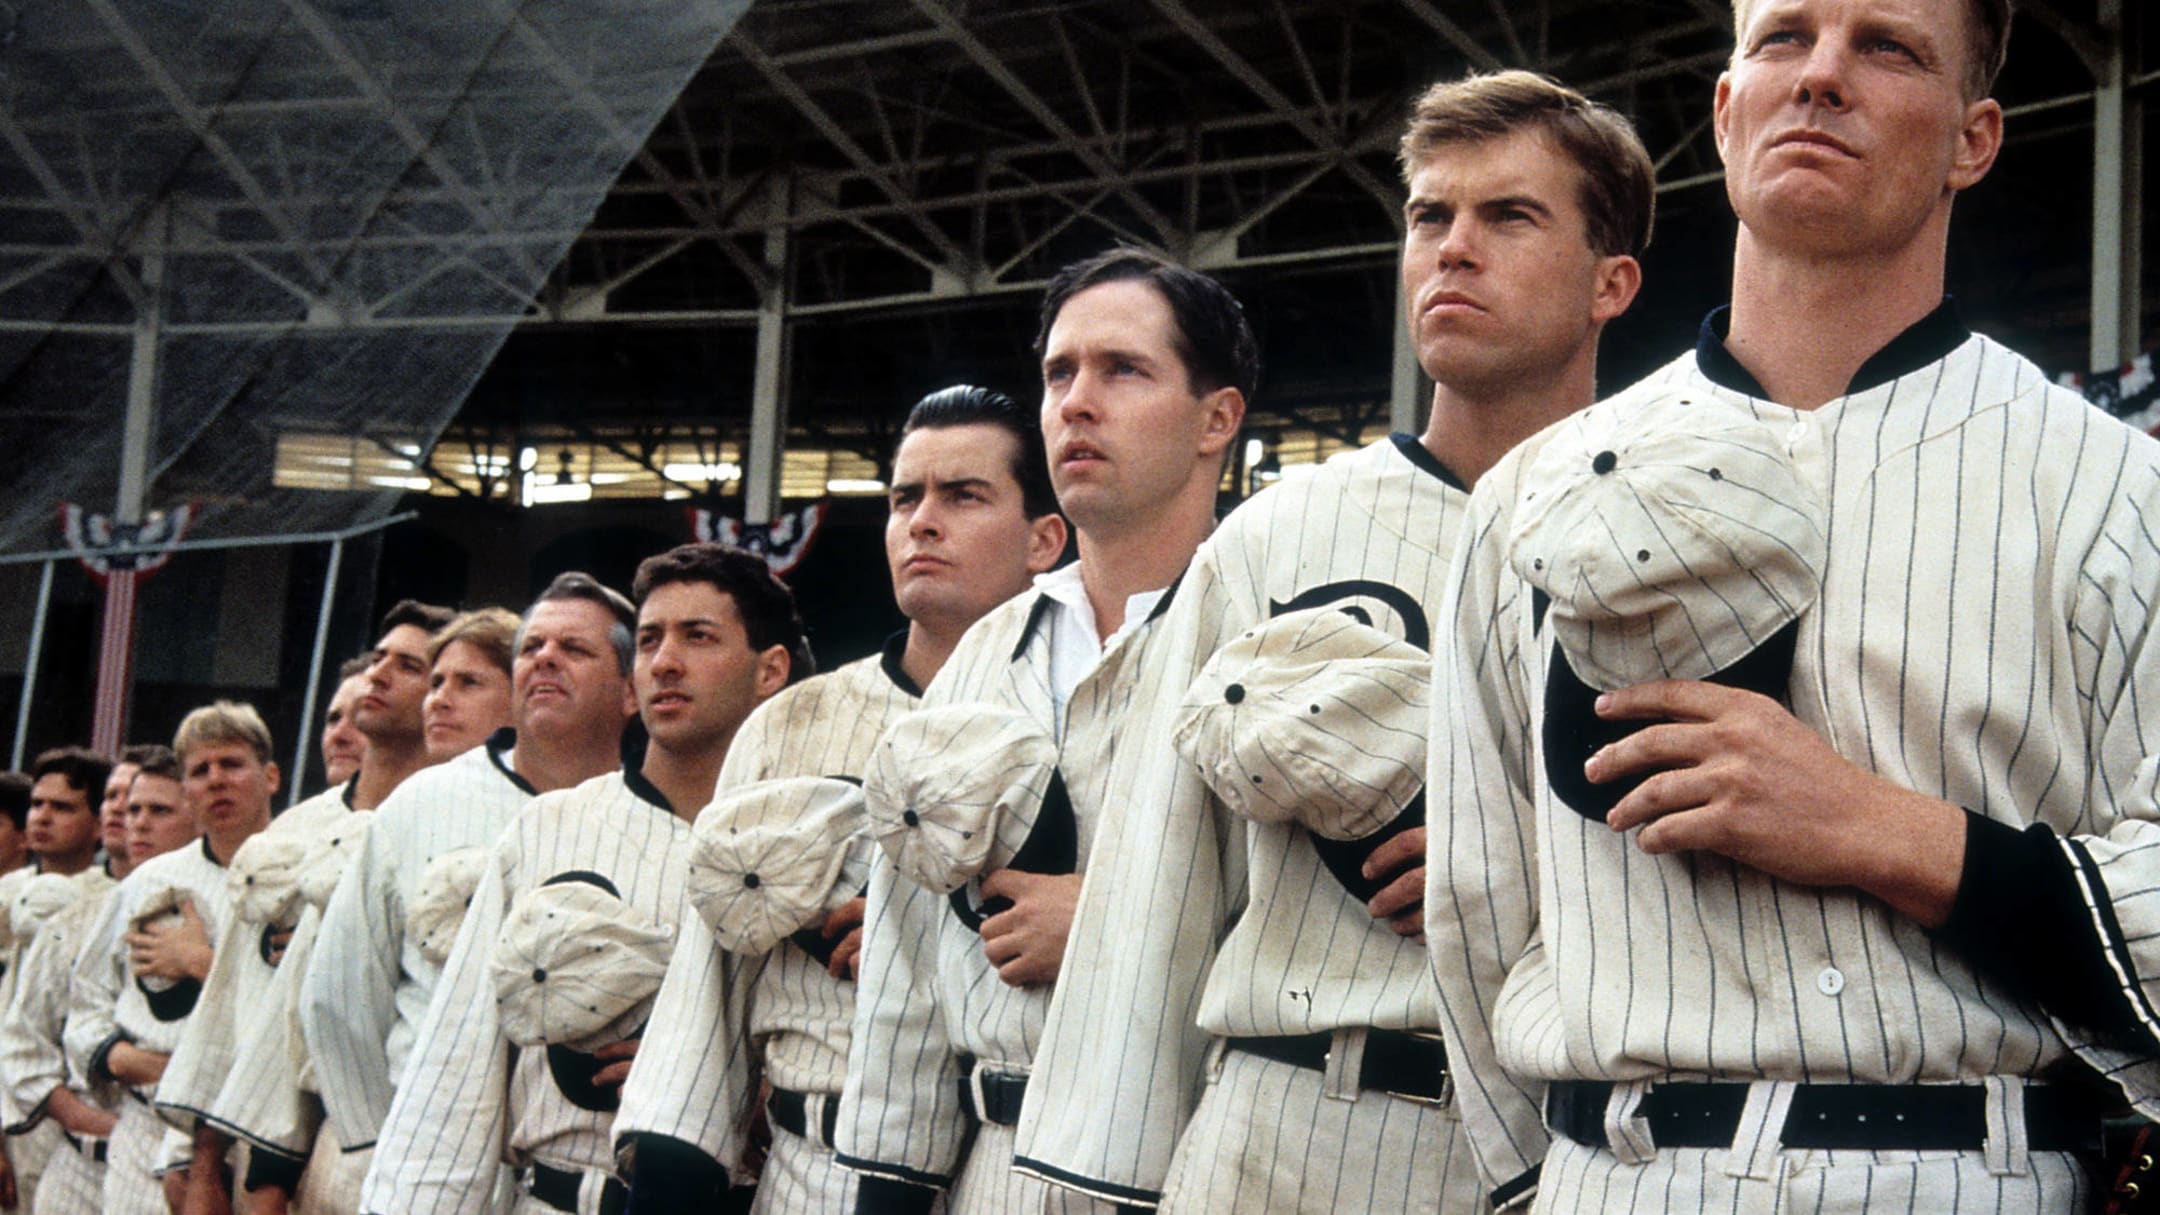 66 Best Baseball Movies of All Time